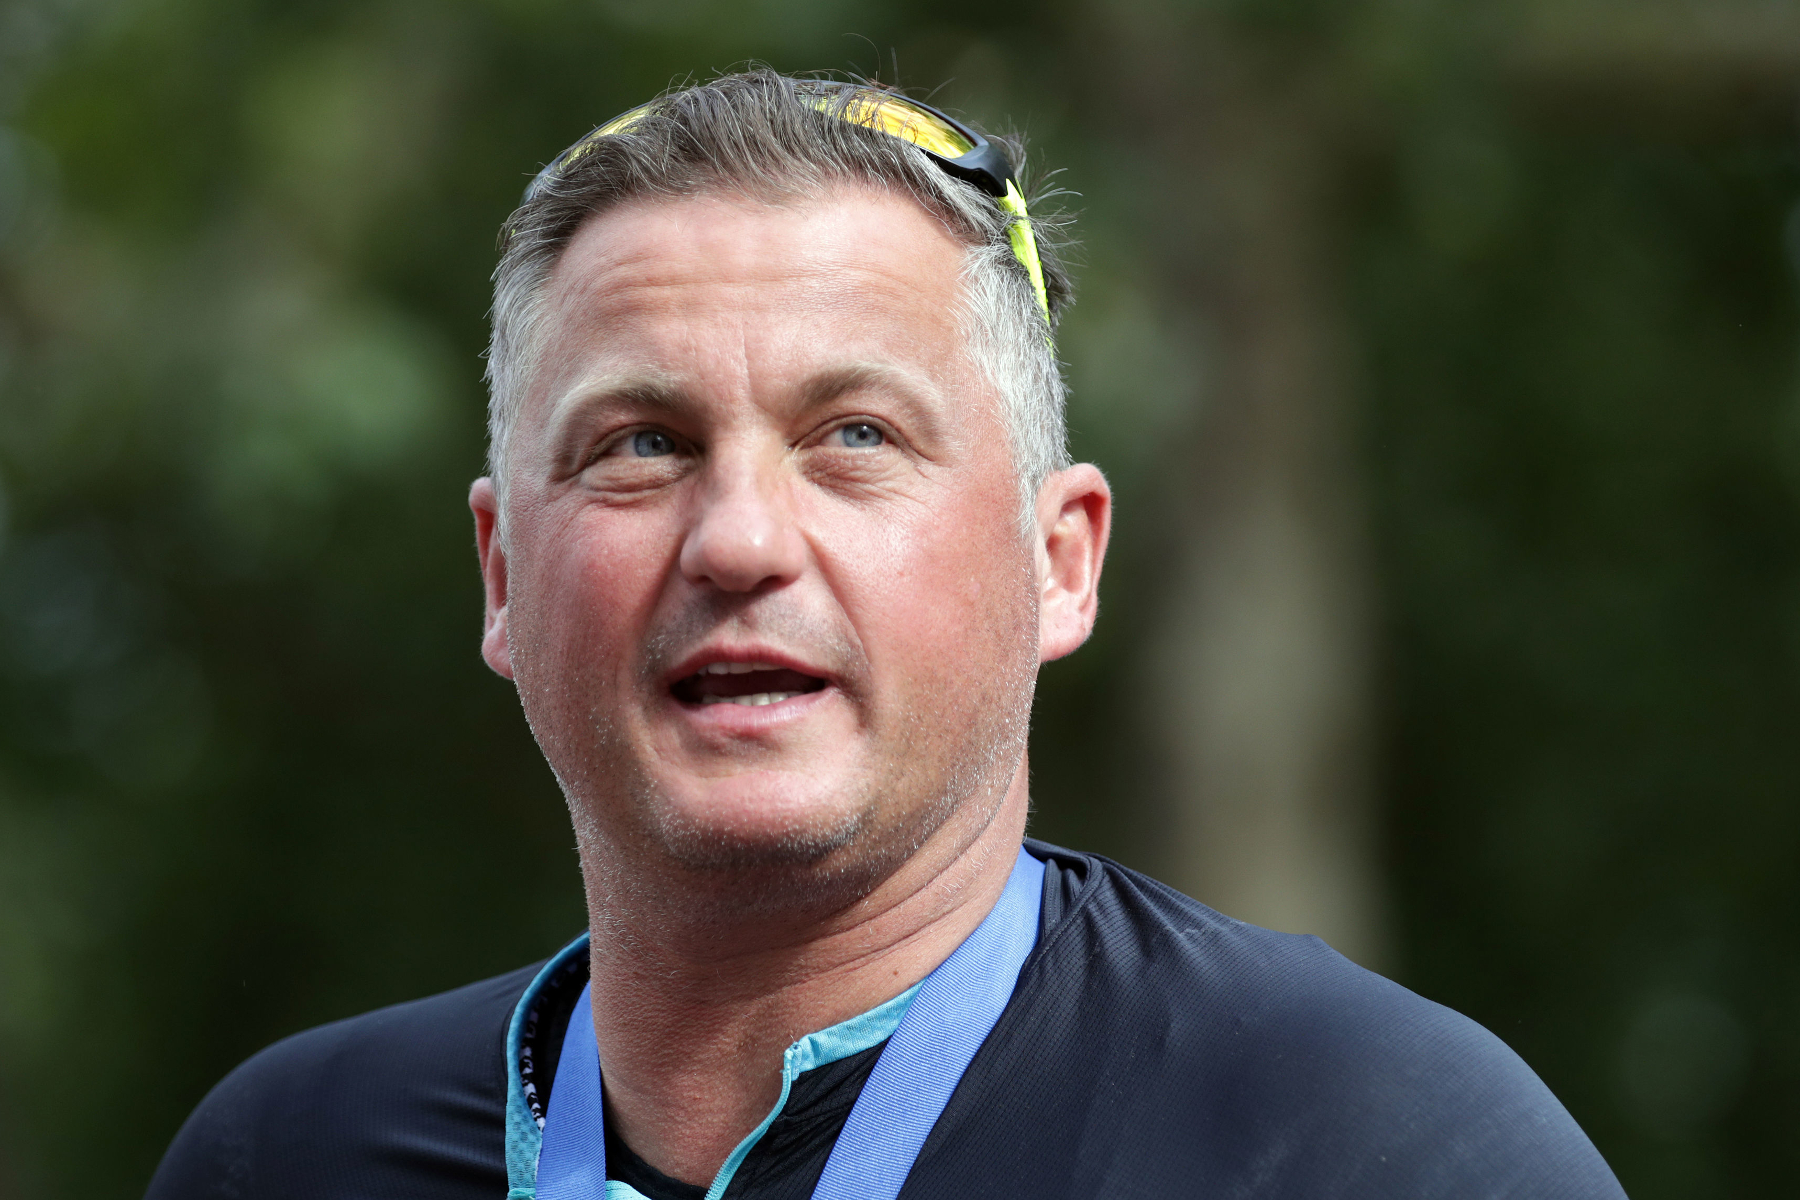 Former England Pacer Darren Gough appointed as managing director of Yorkshire Cricket